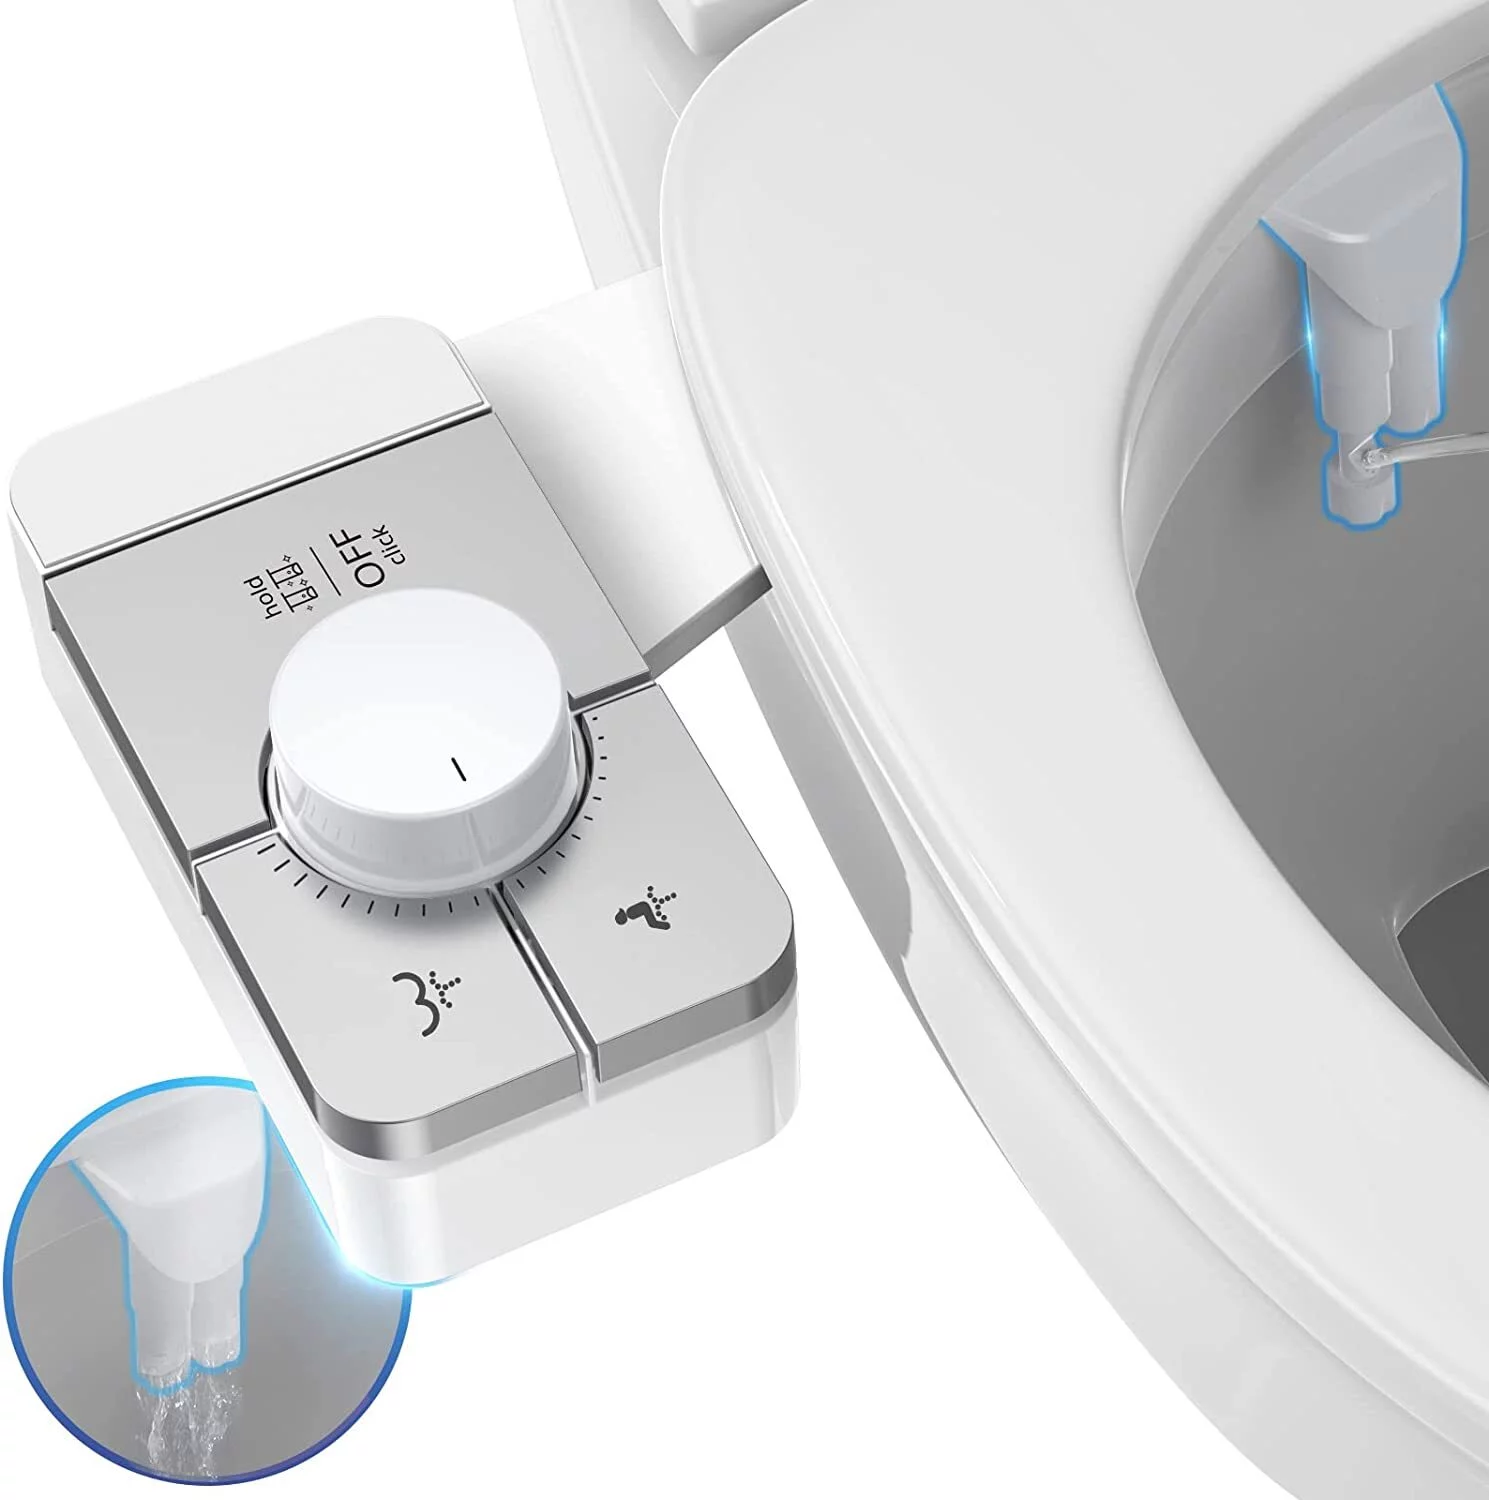 Veken Bidet Attachment for Toilet - Ultra-Slim Self Cleaning Fresh Water Sprayer Bidets Toilet Seat Attachment with Dual Nozzle for Feminine and Posterior Wash